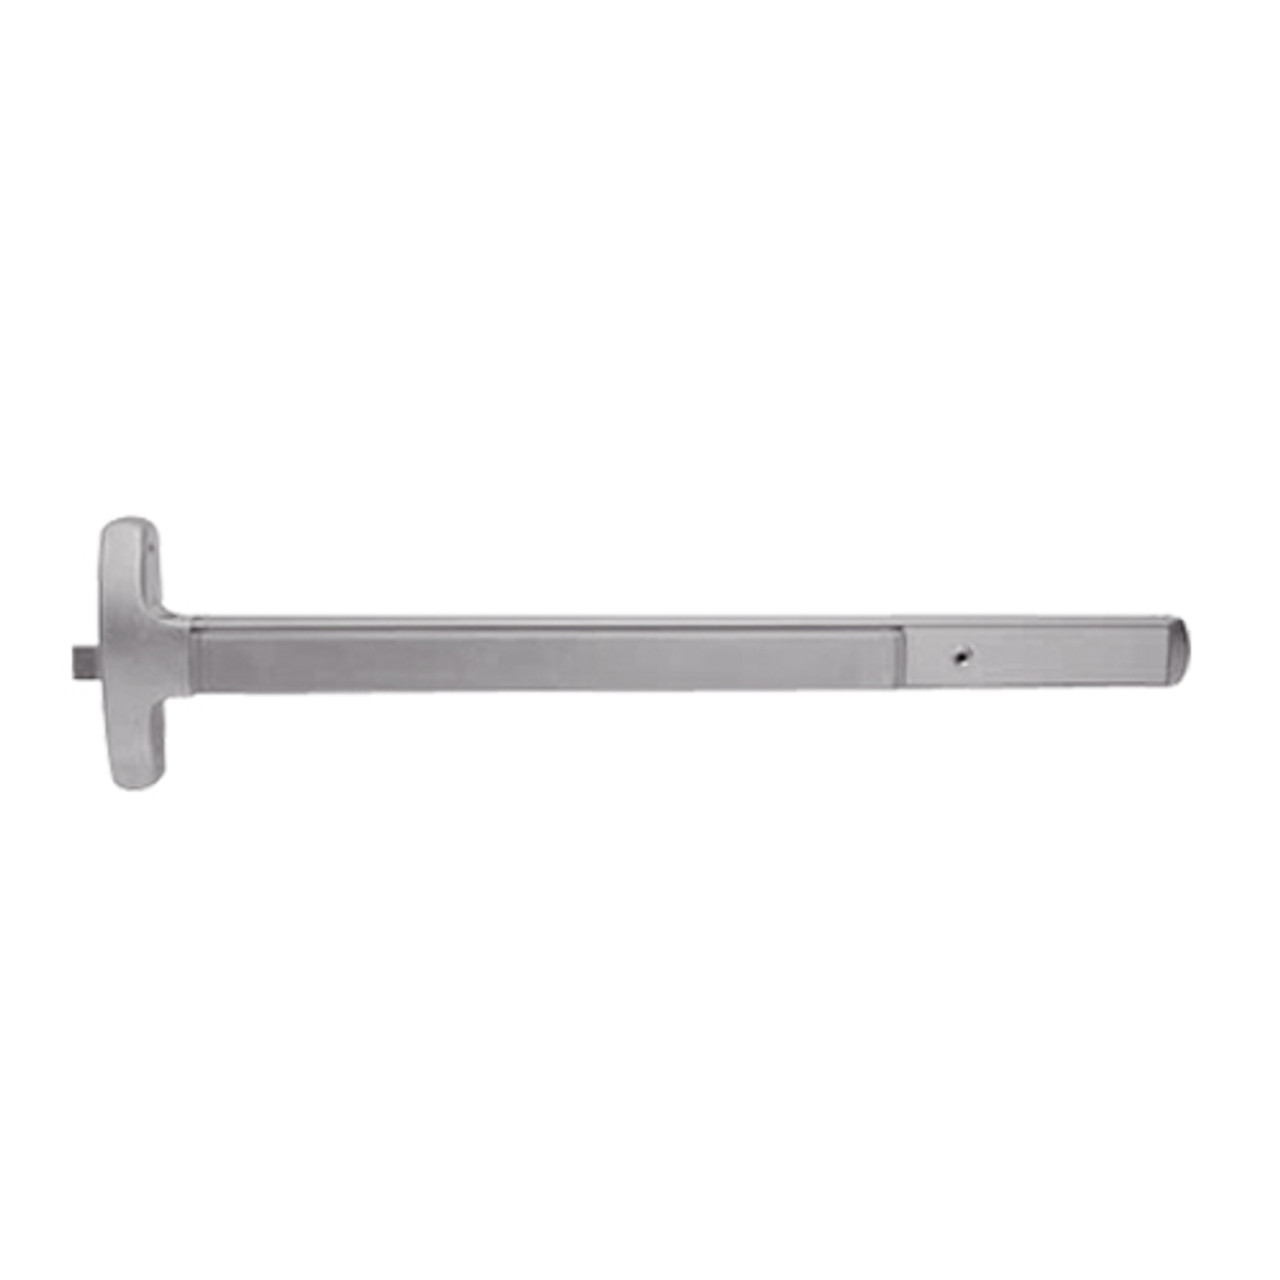 24-R-EO-US32D-4 Falcon Exit Device in Satin Stainless Steel